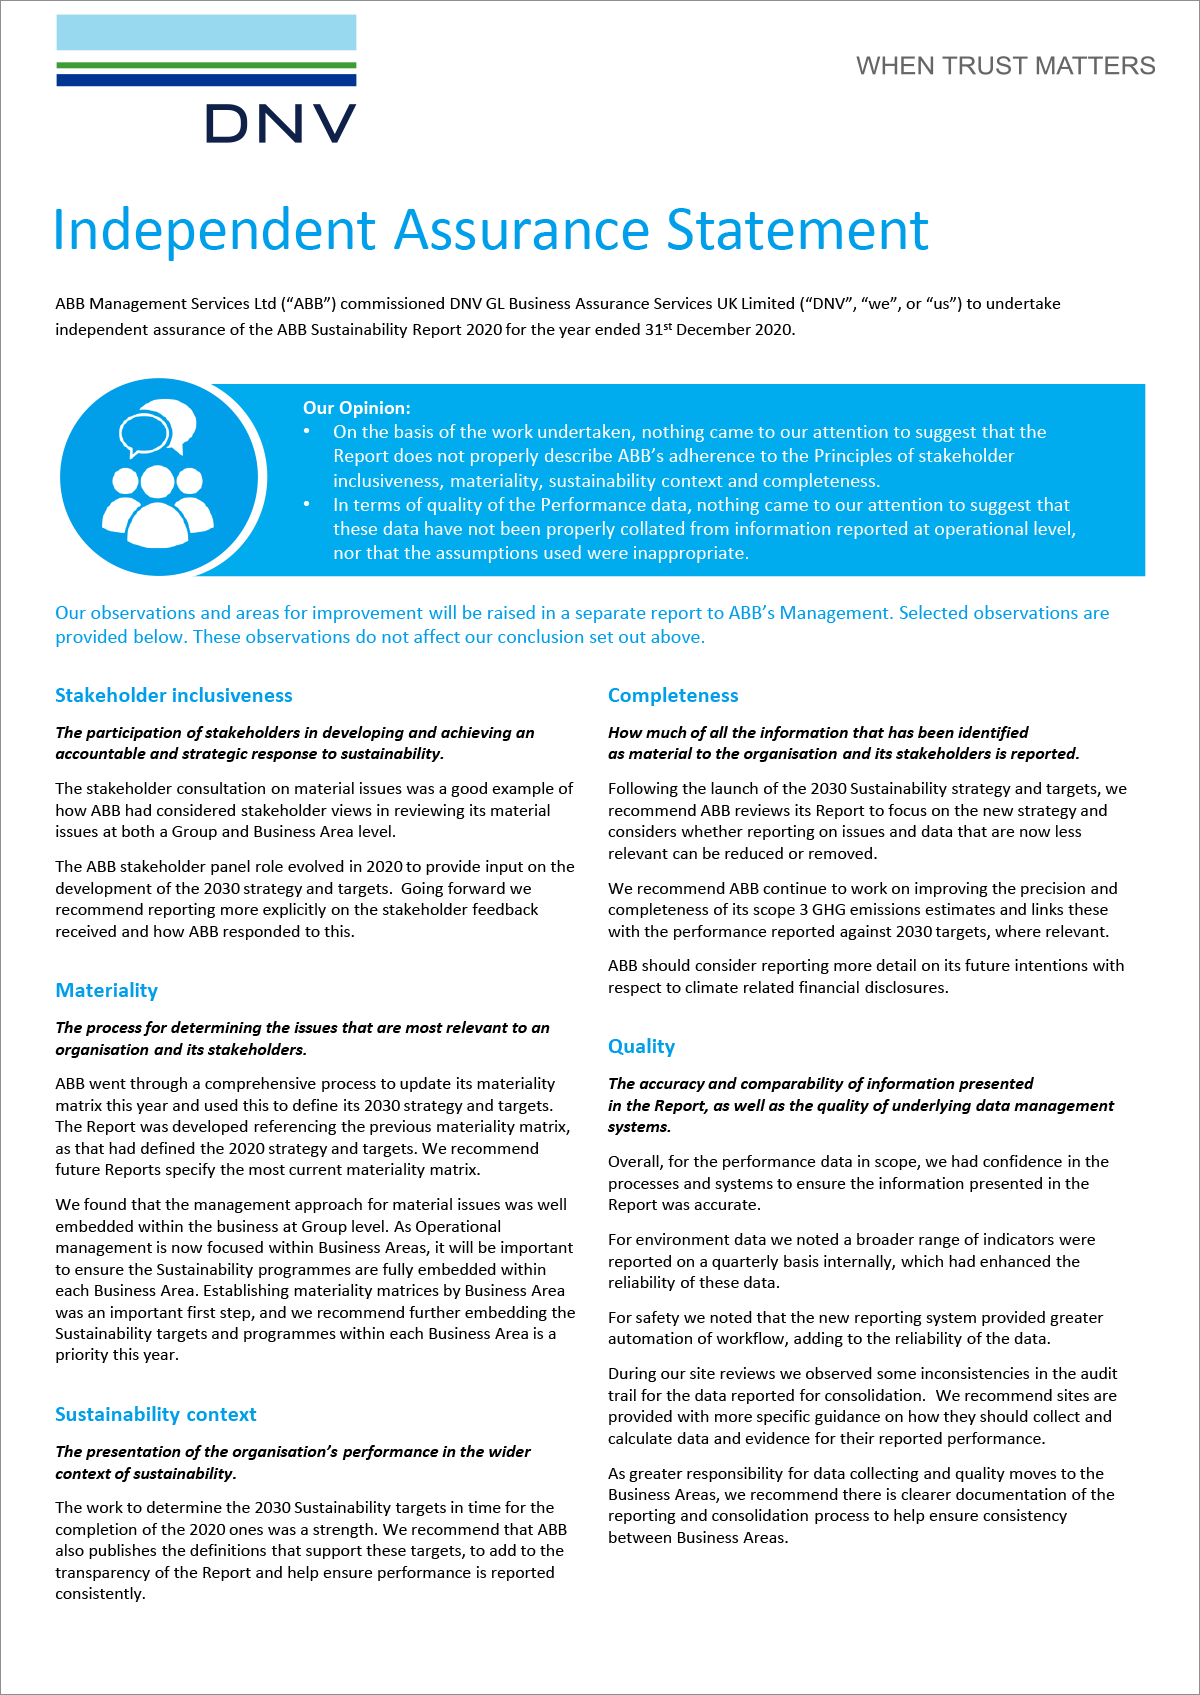 DNV GL assurance statement (page 1 of 2) (graphic)